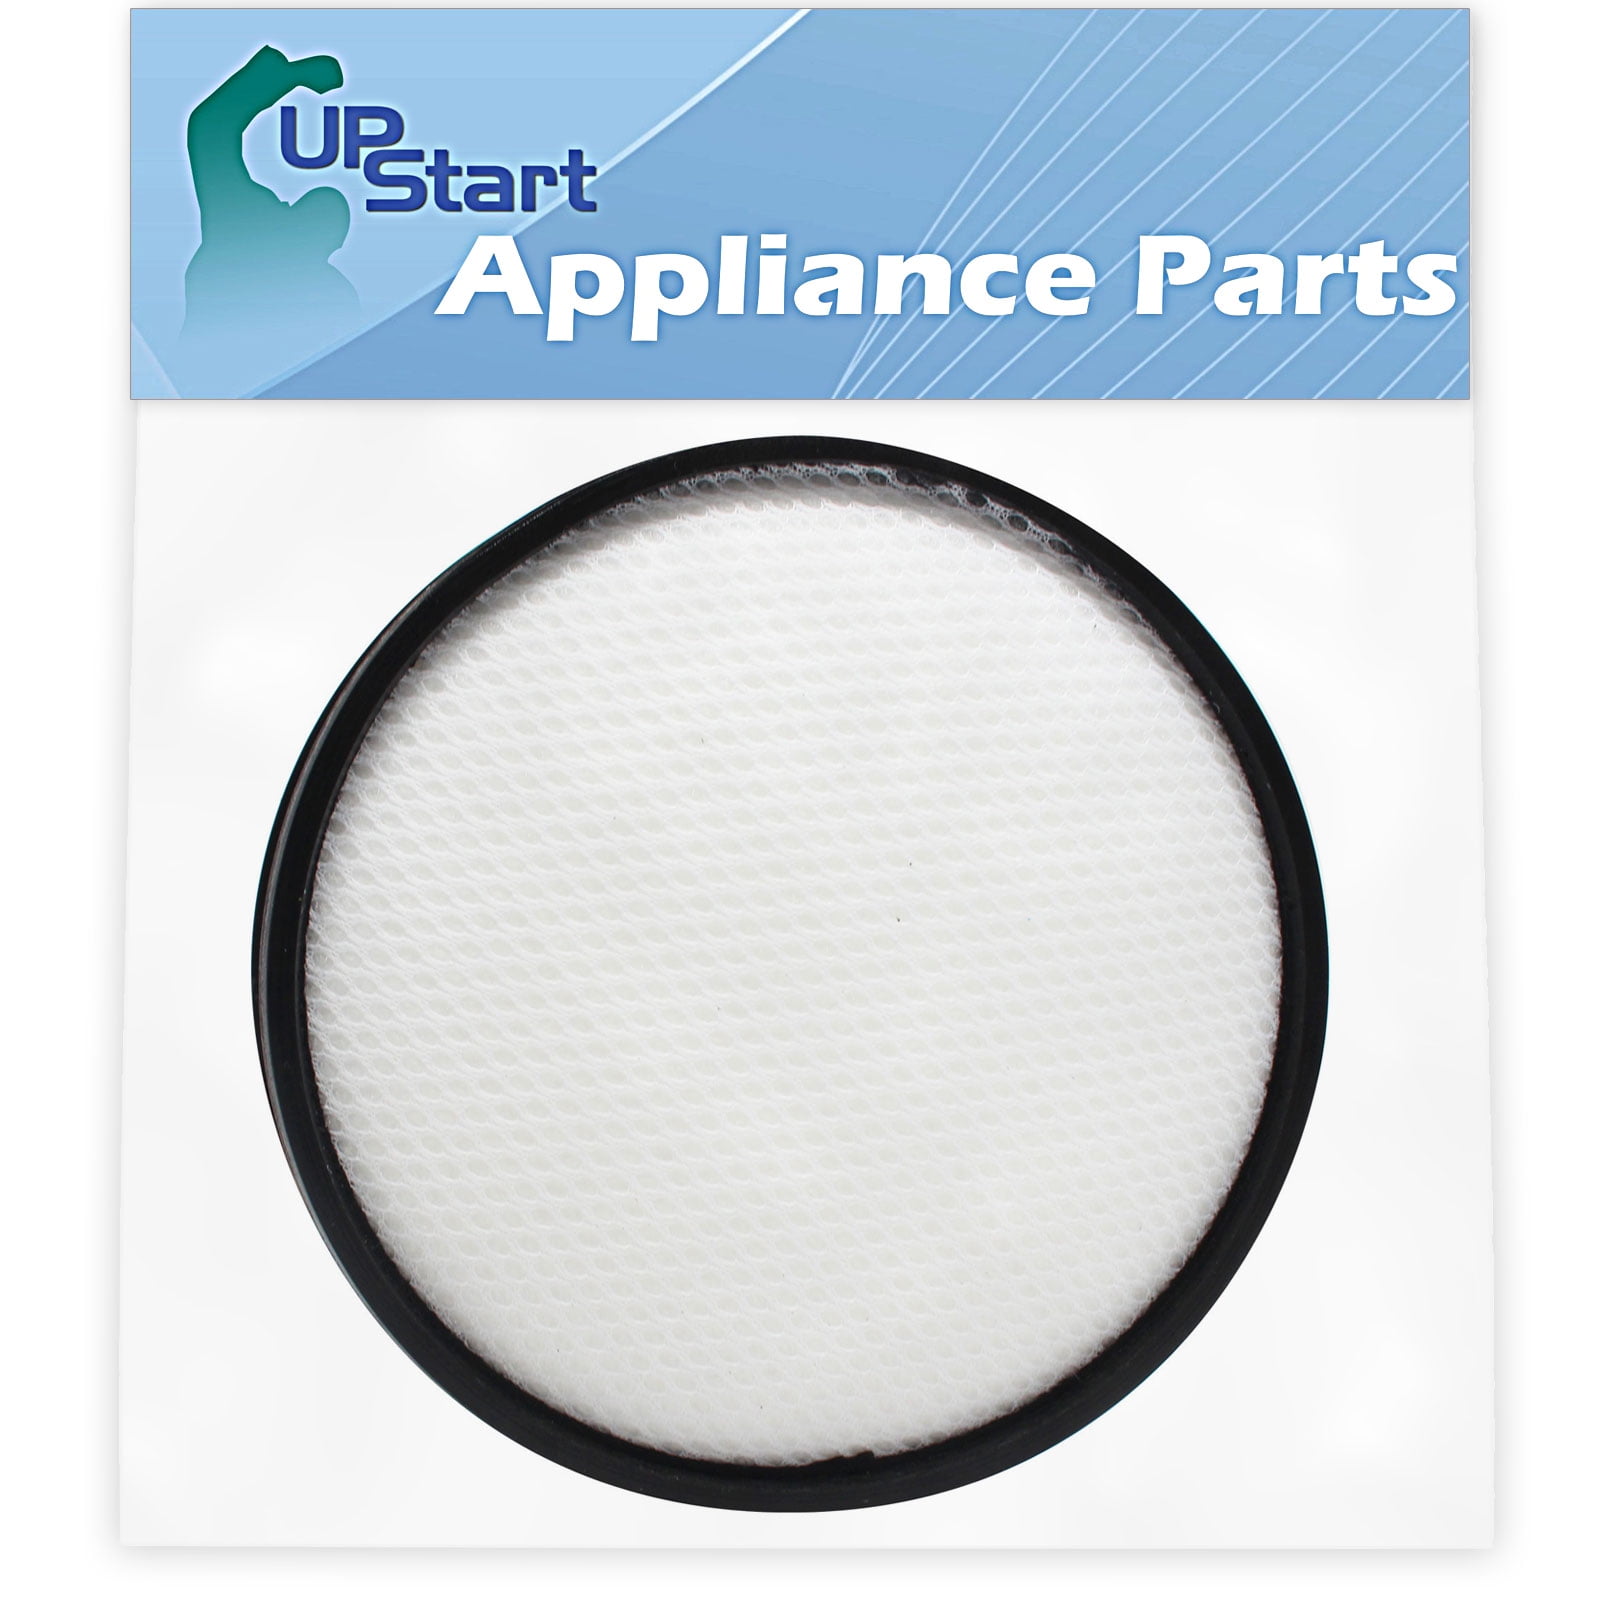 2x HQRP Washable Filters for Hoover UH70935 UH70901PC WindTunnel 3 Pro Bagless 887774833689 